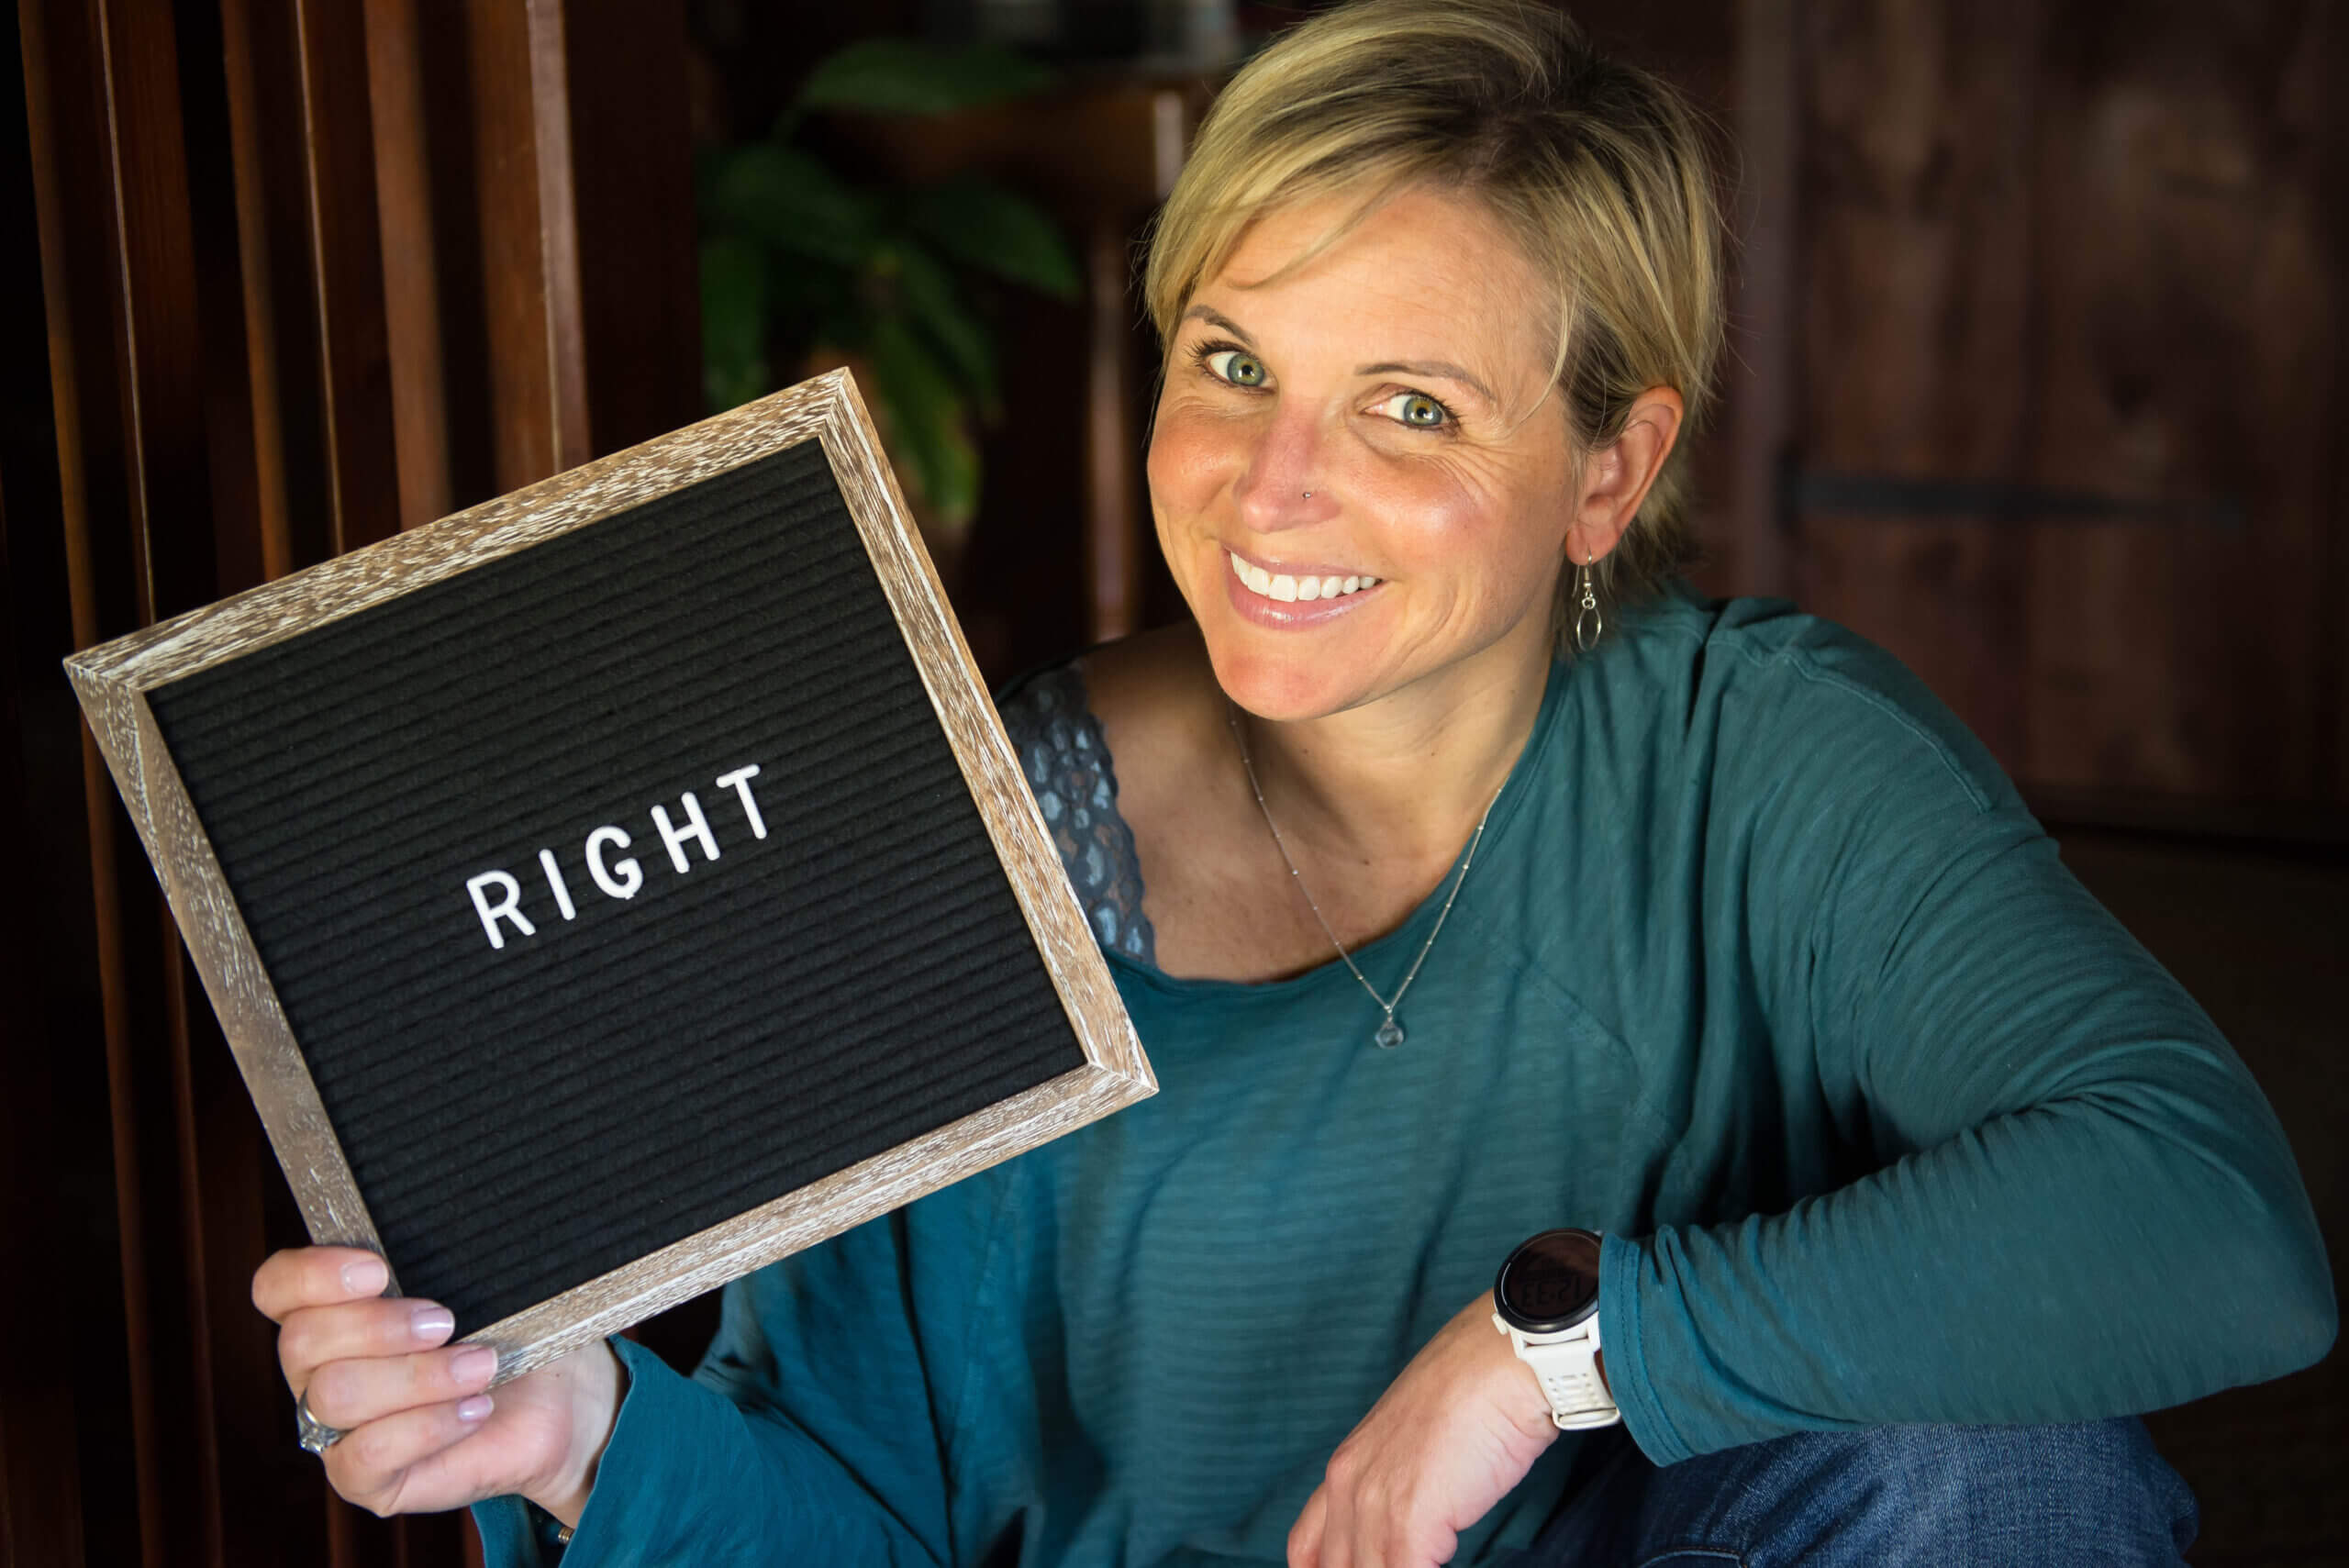 Color photo of a white woman holding a sign with the word "RIGHT" on it.